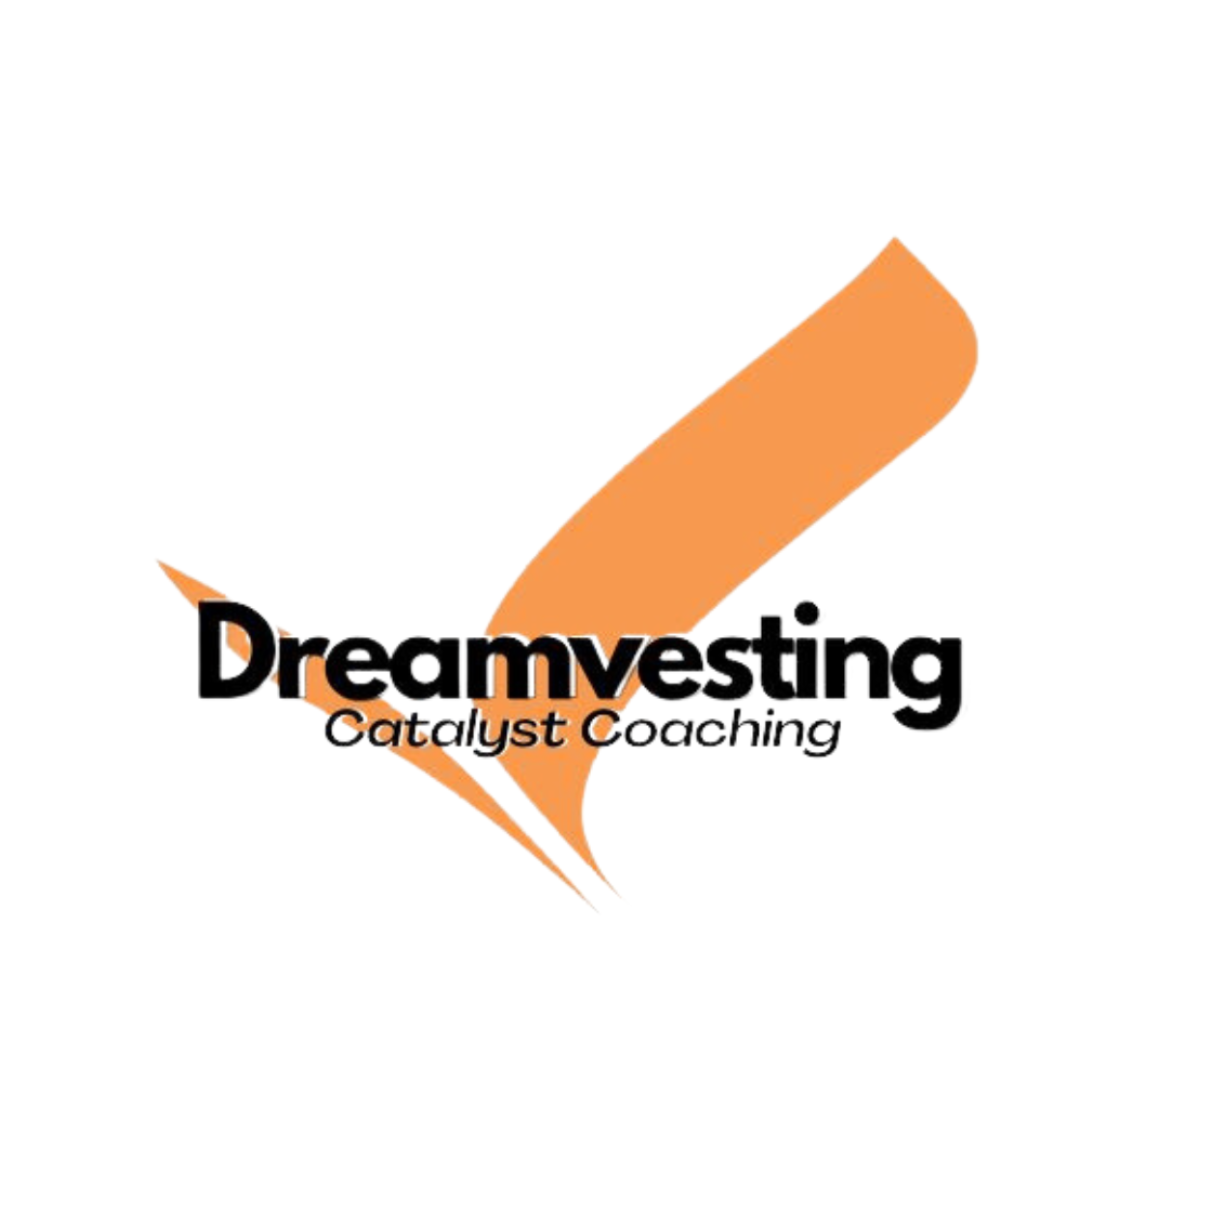 Timber Creek Virtual provides an administrative assistant for DreamVesting Catalyst Coaching